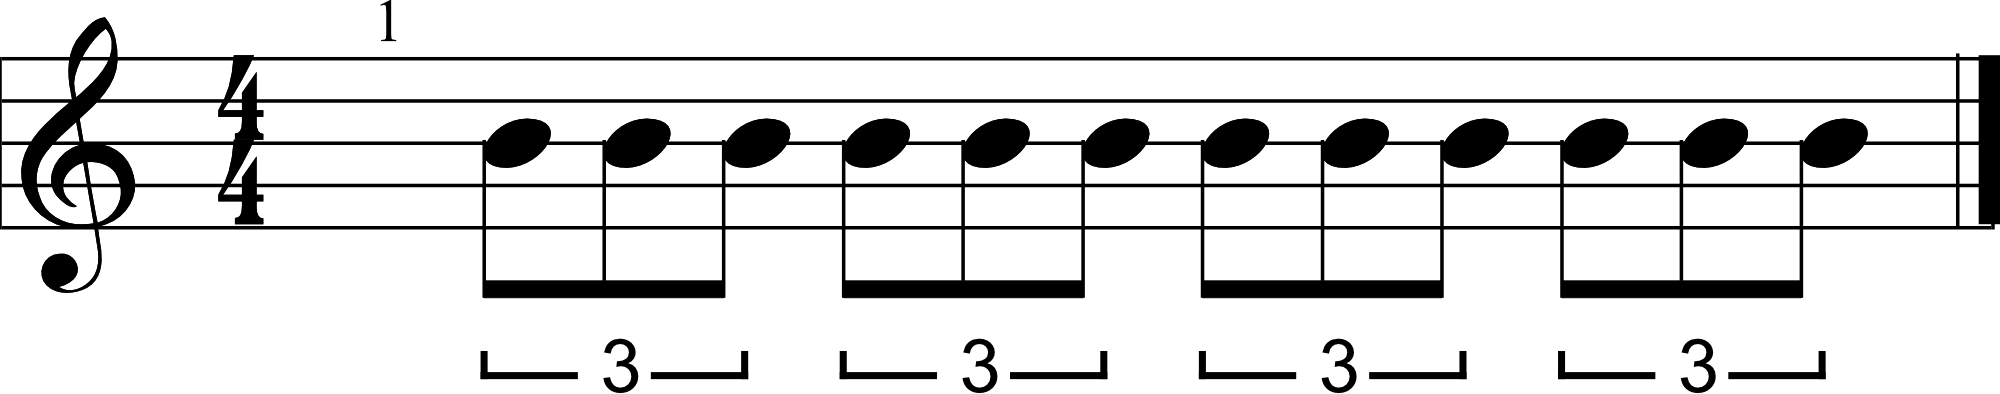 Eighth Note Triplet Example